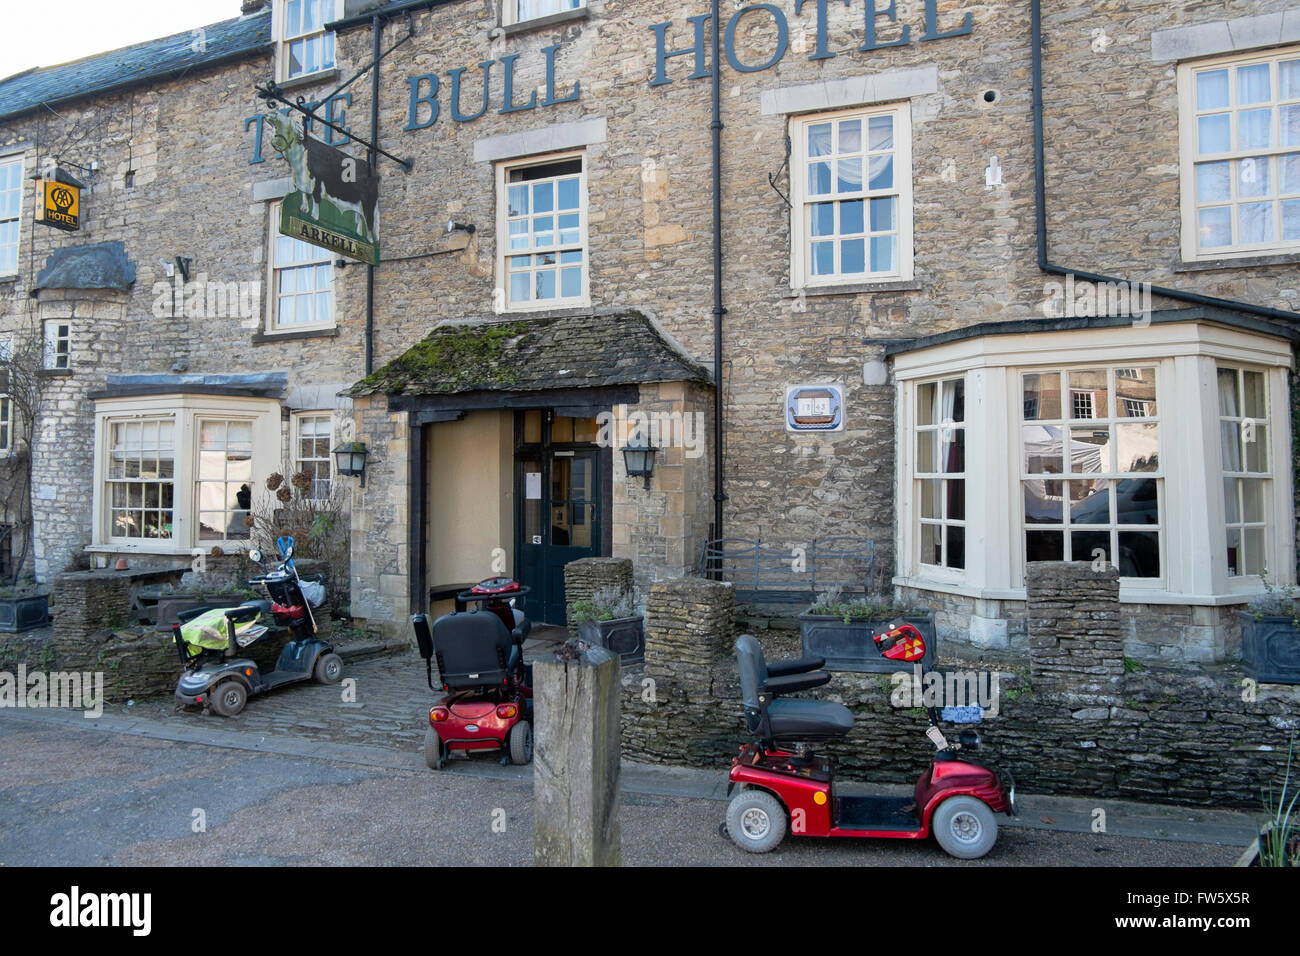 Three mobility scooters parked outside The Bull Hotel in the High Street in Fairford, Gloucestershire, UK Stock Photo